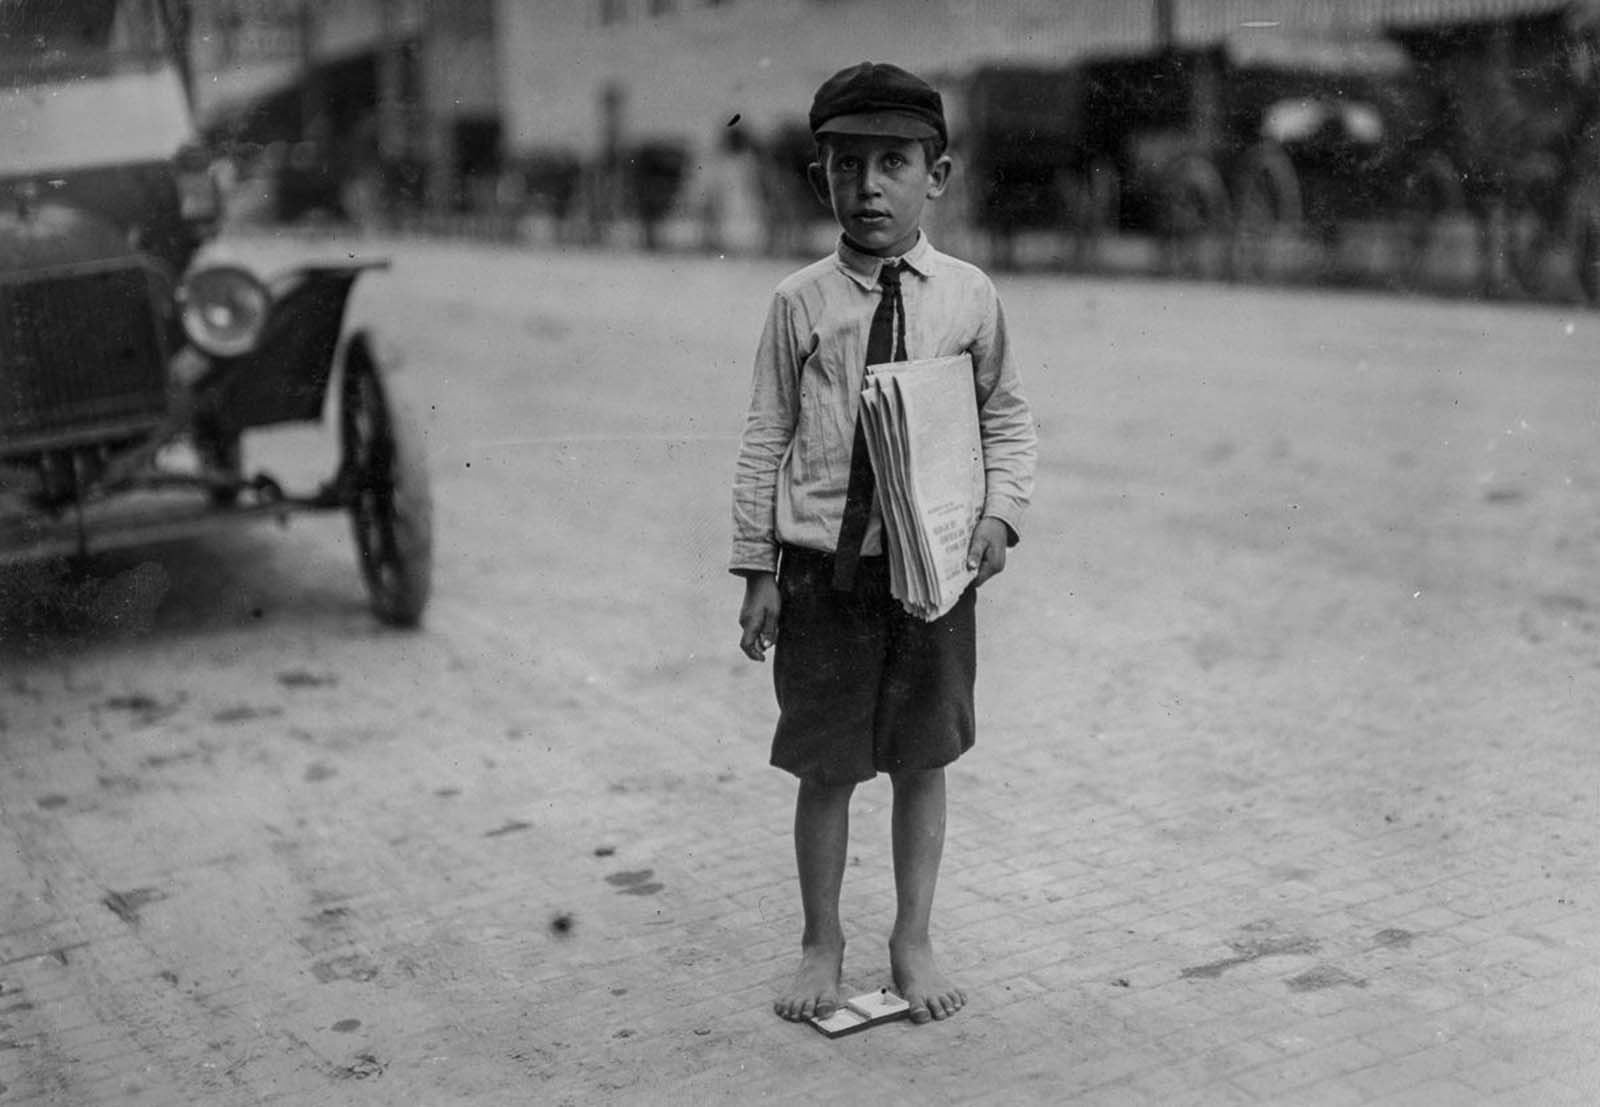 Eight-year-old newsie. Many youngsters get up early to sell papers. One 10-year-old starts out at 3 a.m. every day and goes to school. Waco, Texas, 1913.